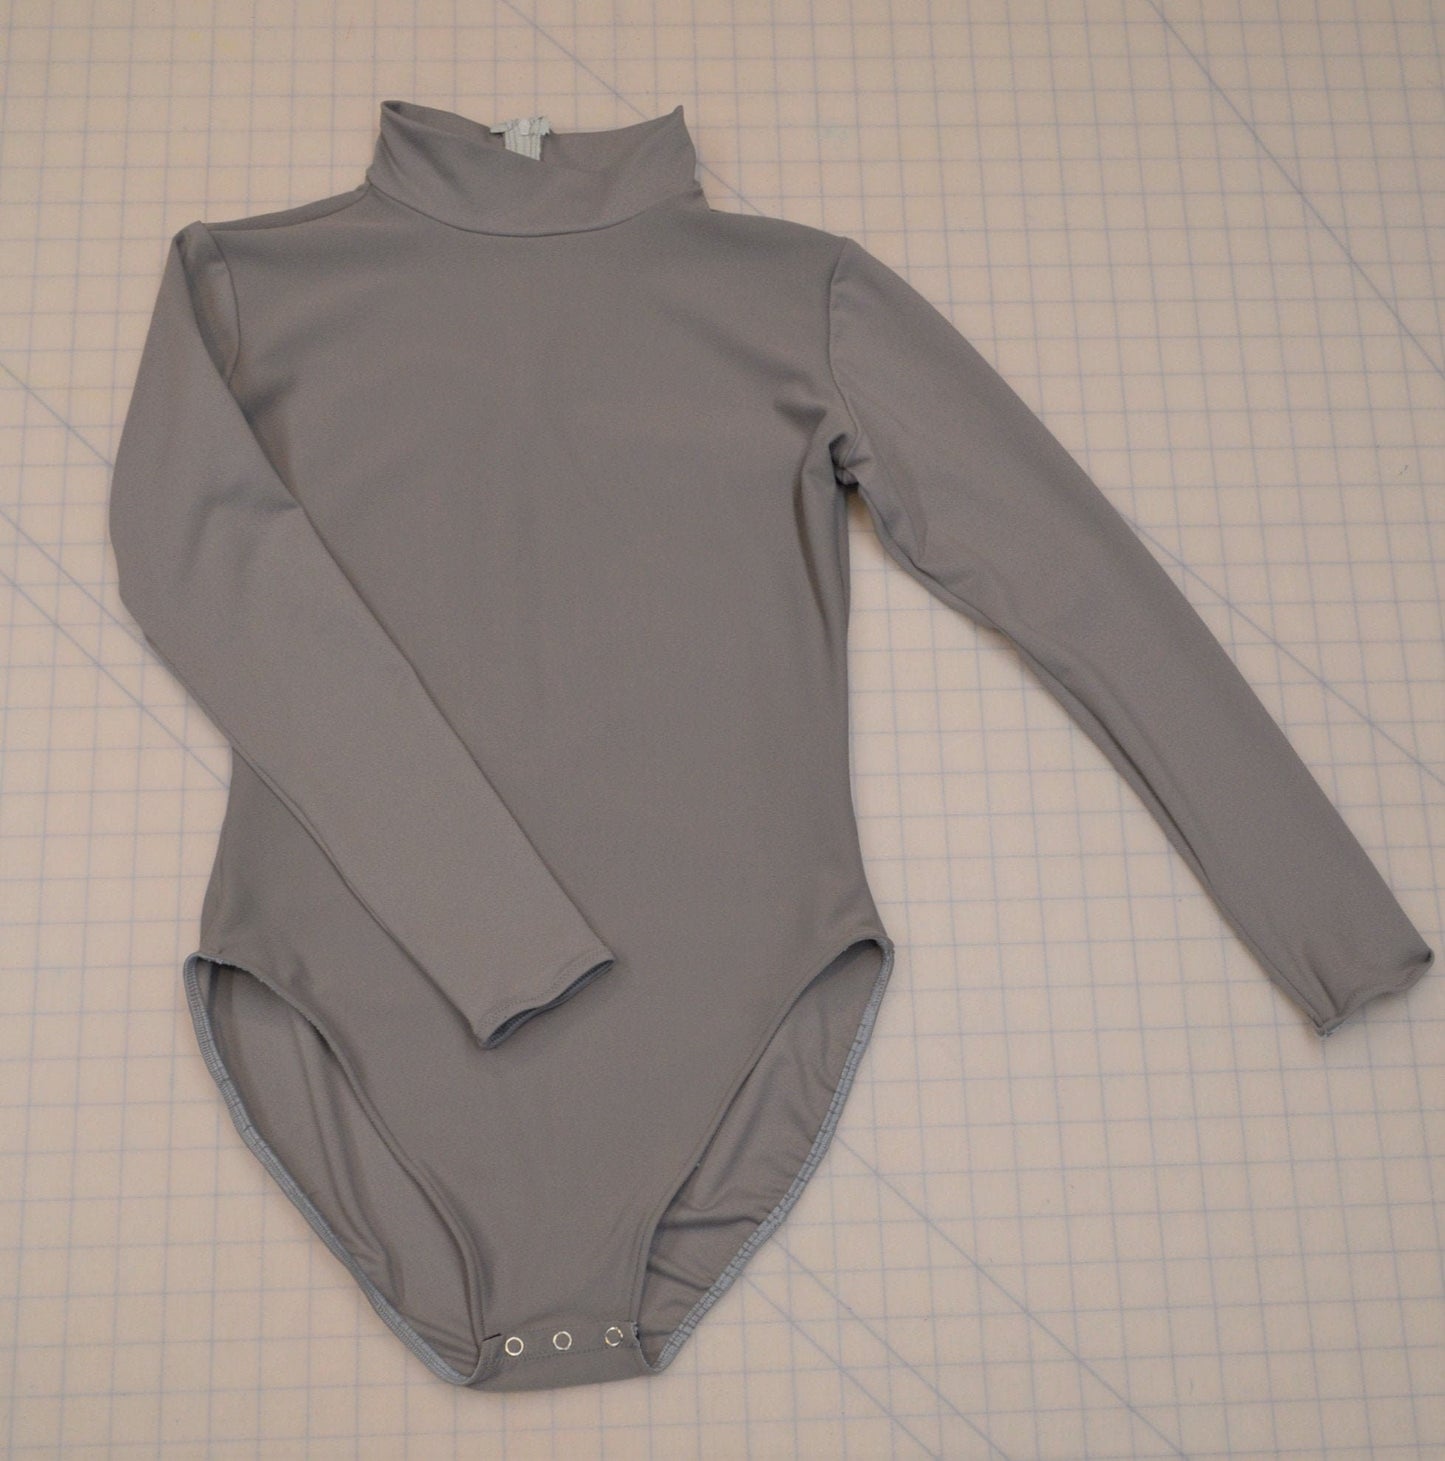 Superhero mock turtleneck Leotard in Bat Grey with zipper, snap crotch and front modesty panel.